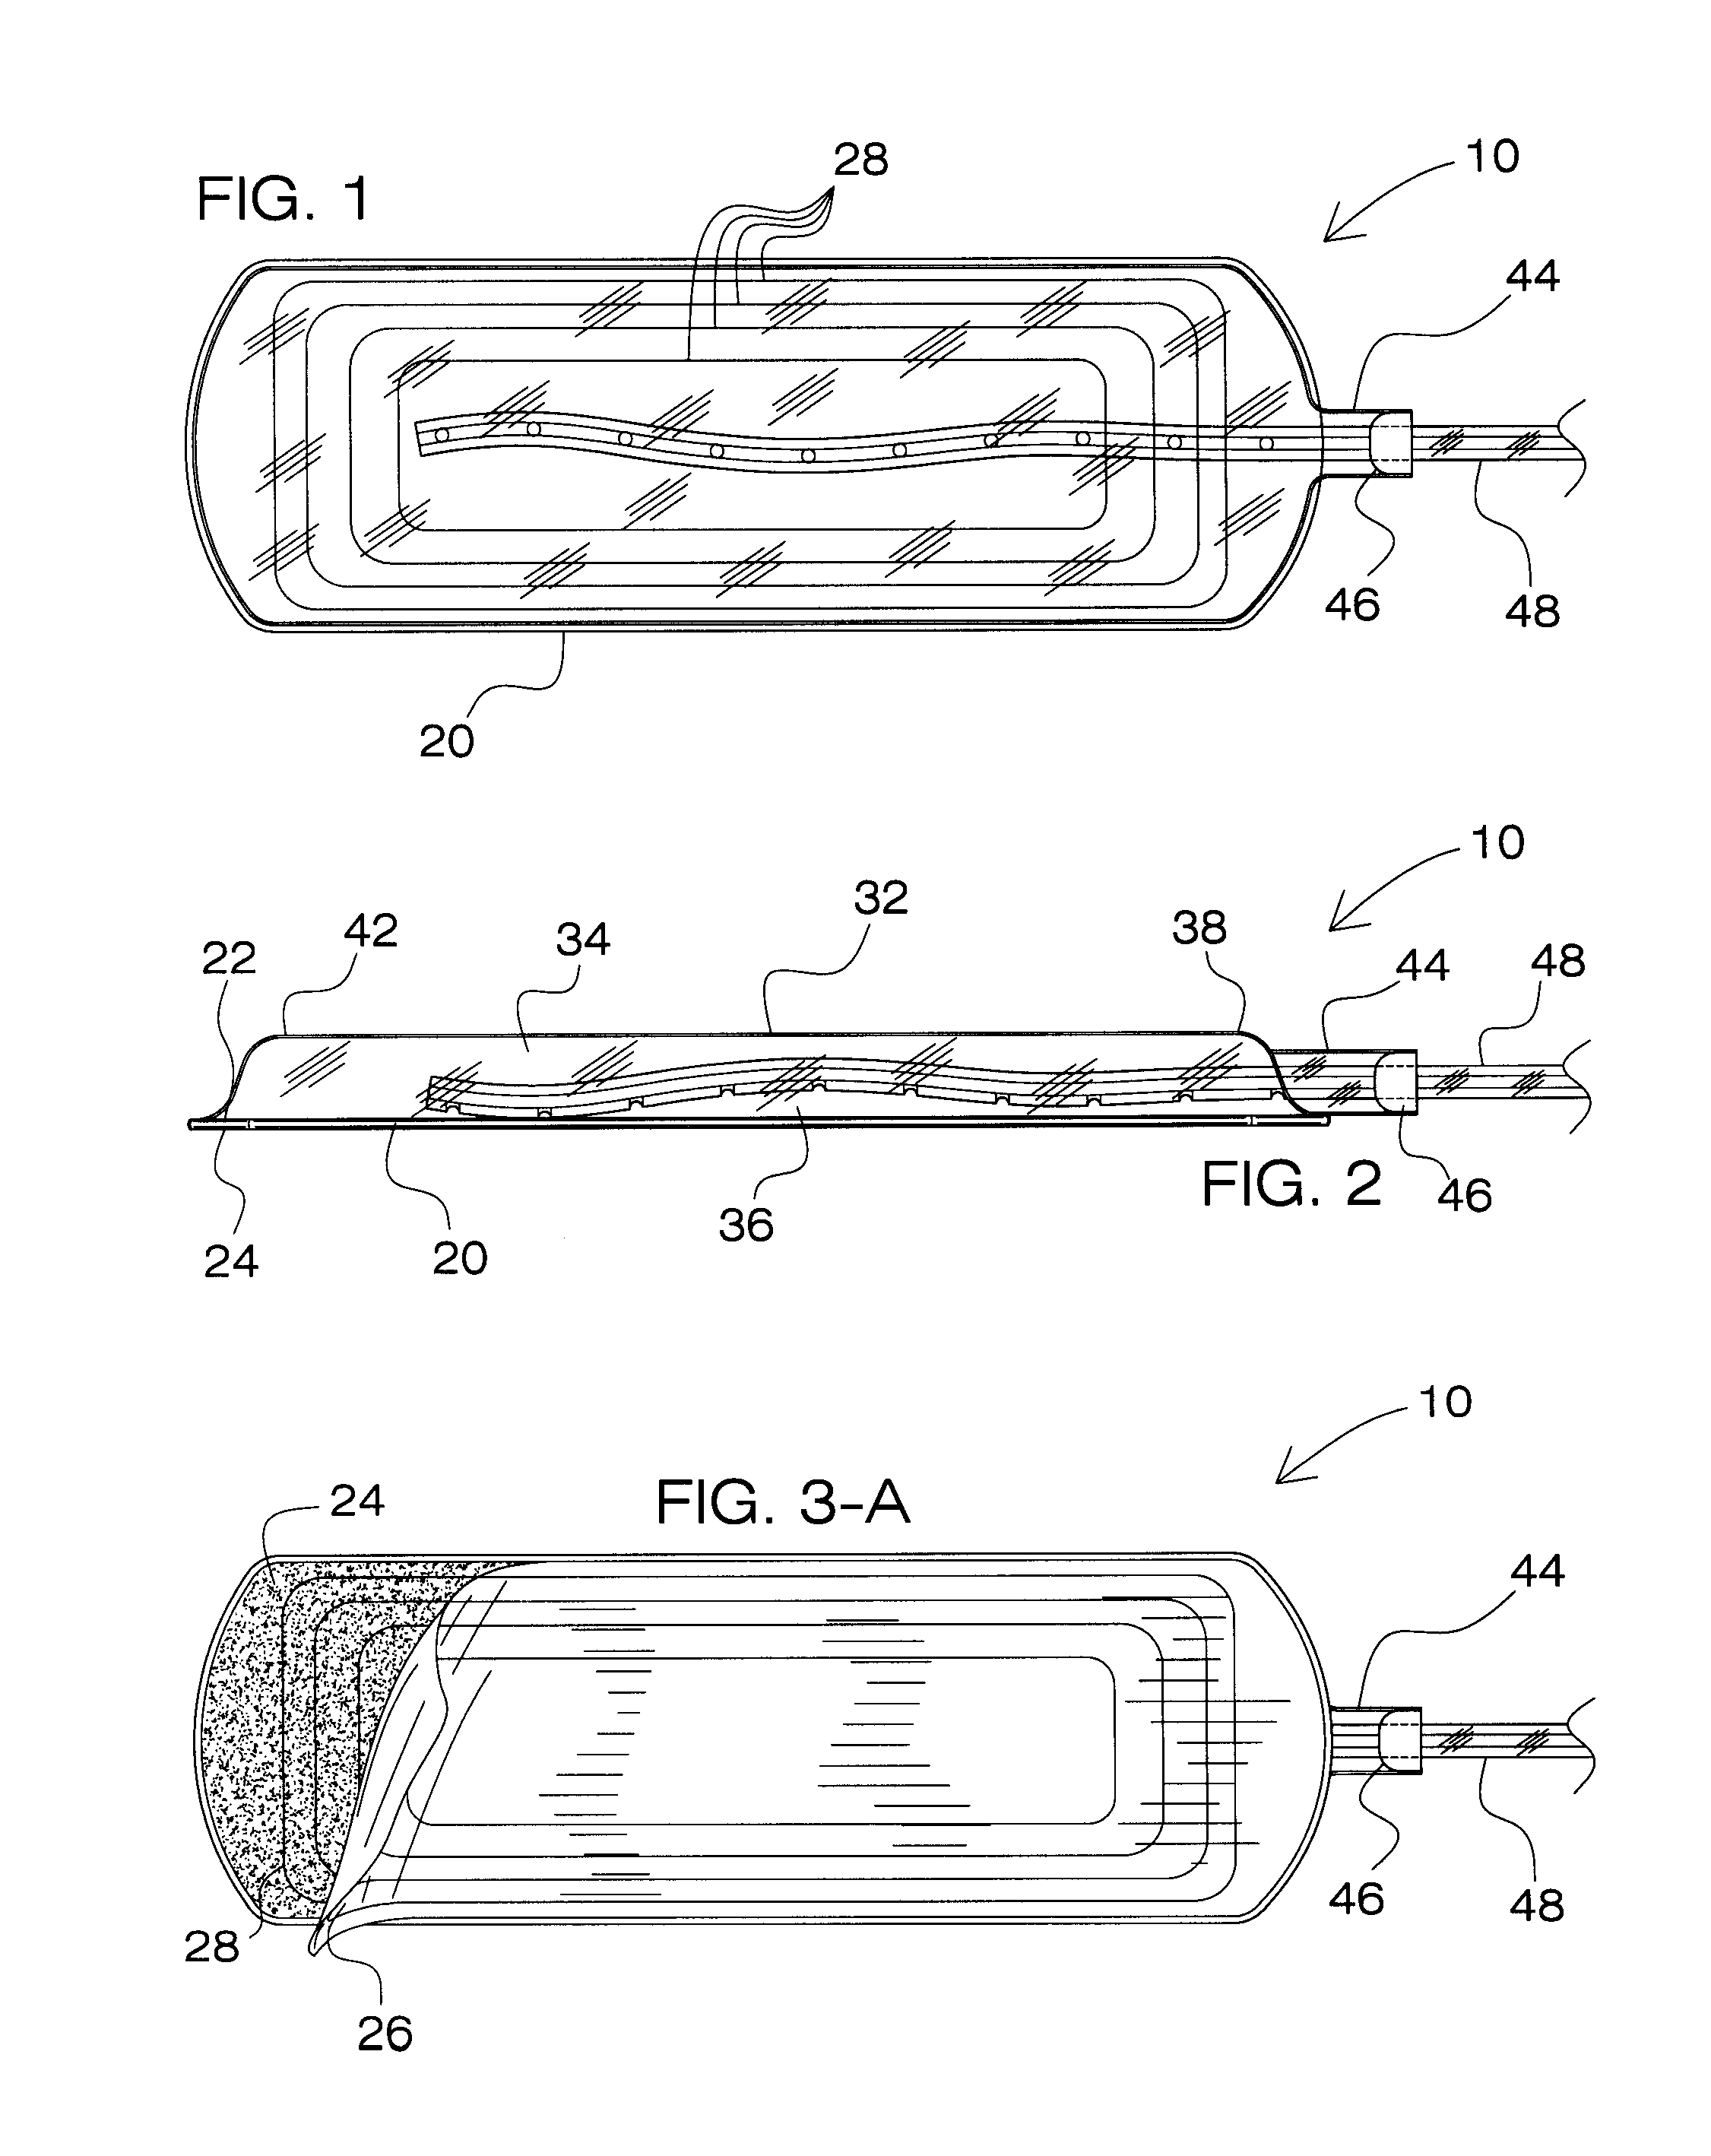 System and Method for Draining Bodily Fluids from a Treatment Site